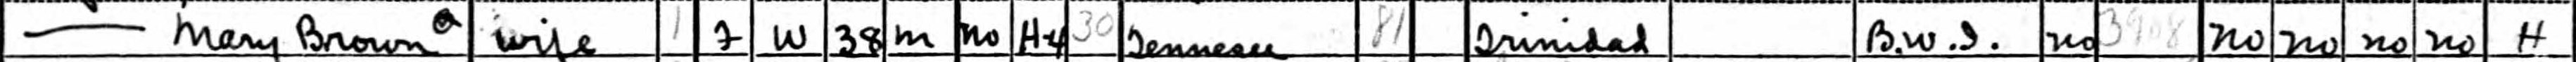 census entry for Bryant, showing the "H" indicating she kept house